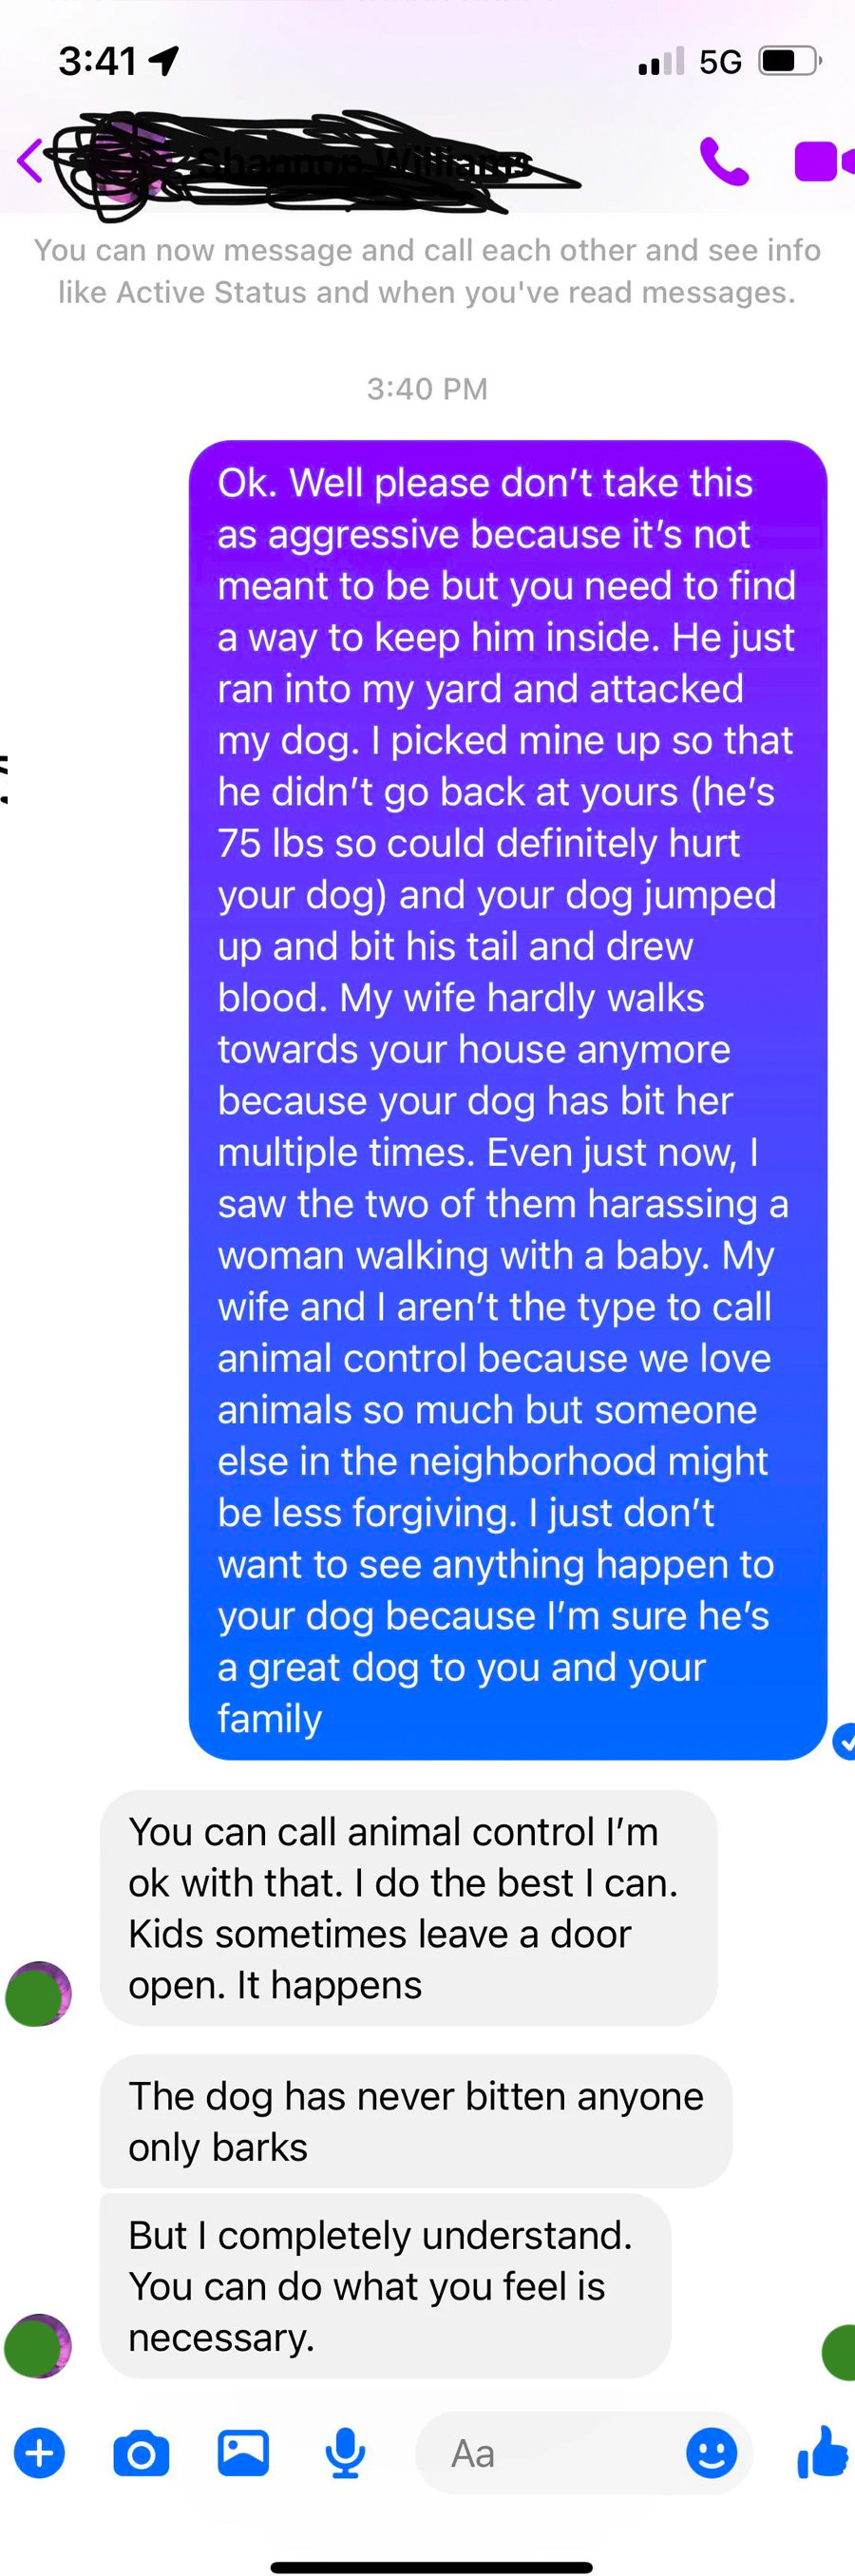 A person says their neighbor&#x27;s dog bit their dog and has bitten their wife, and the neighbor whose dog it is says to just call animal control